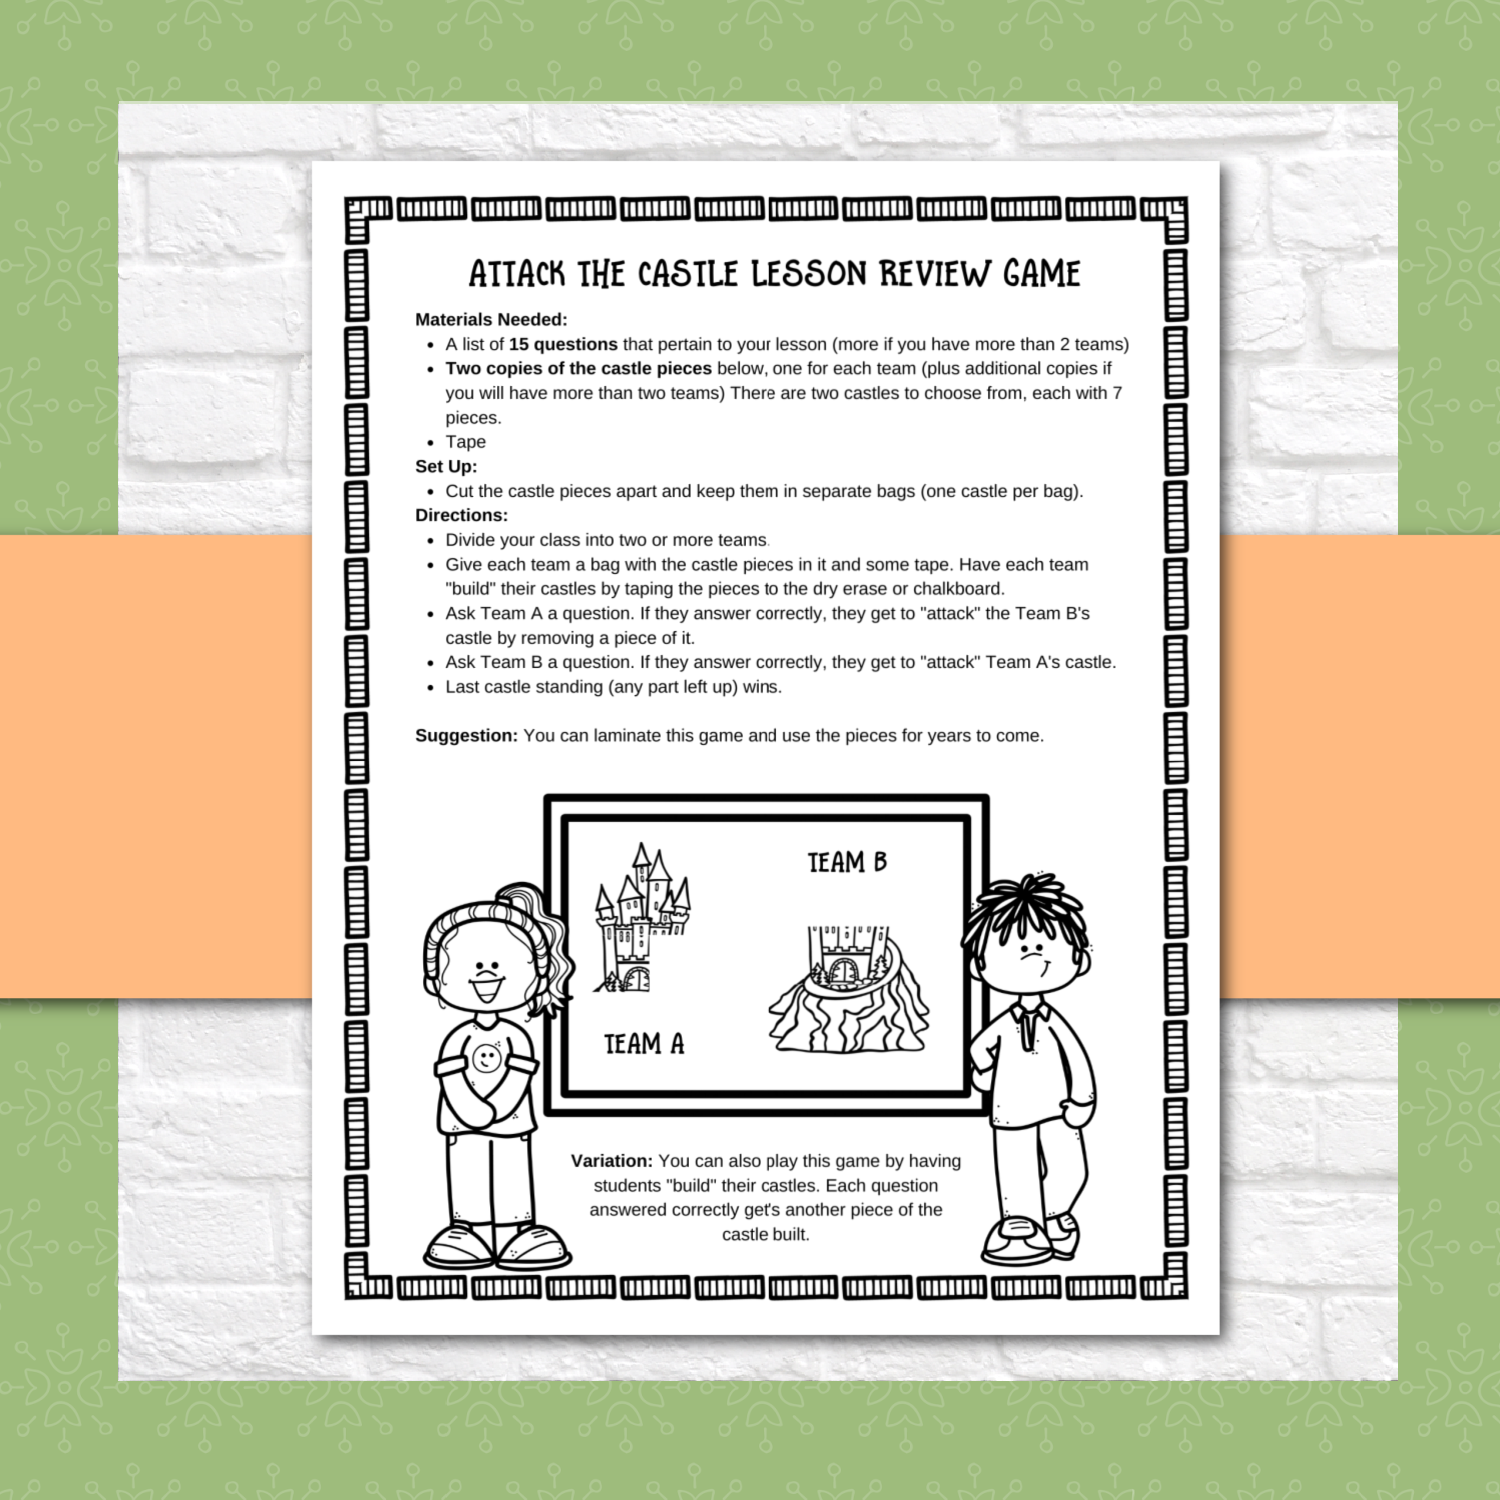 Attack the Castle Lesson Review Game for 2nd, 3rd, 4rth, and 5th Grades